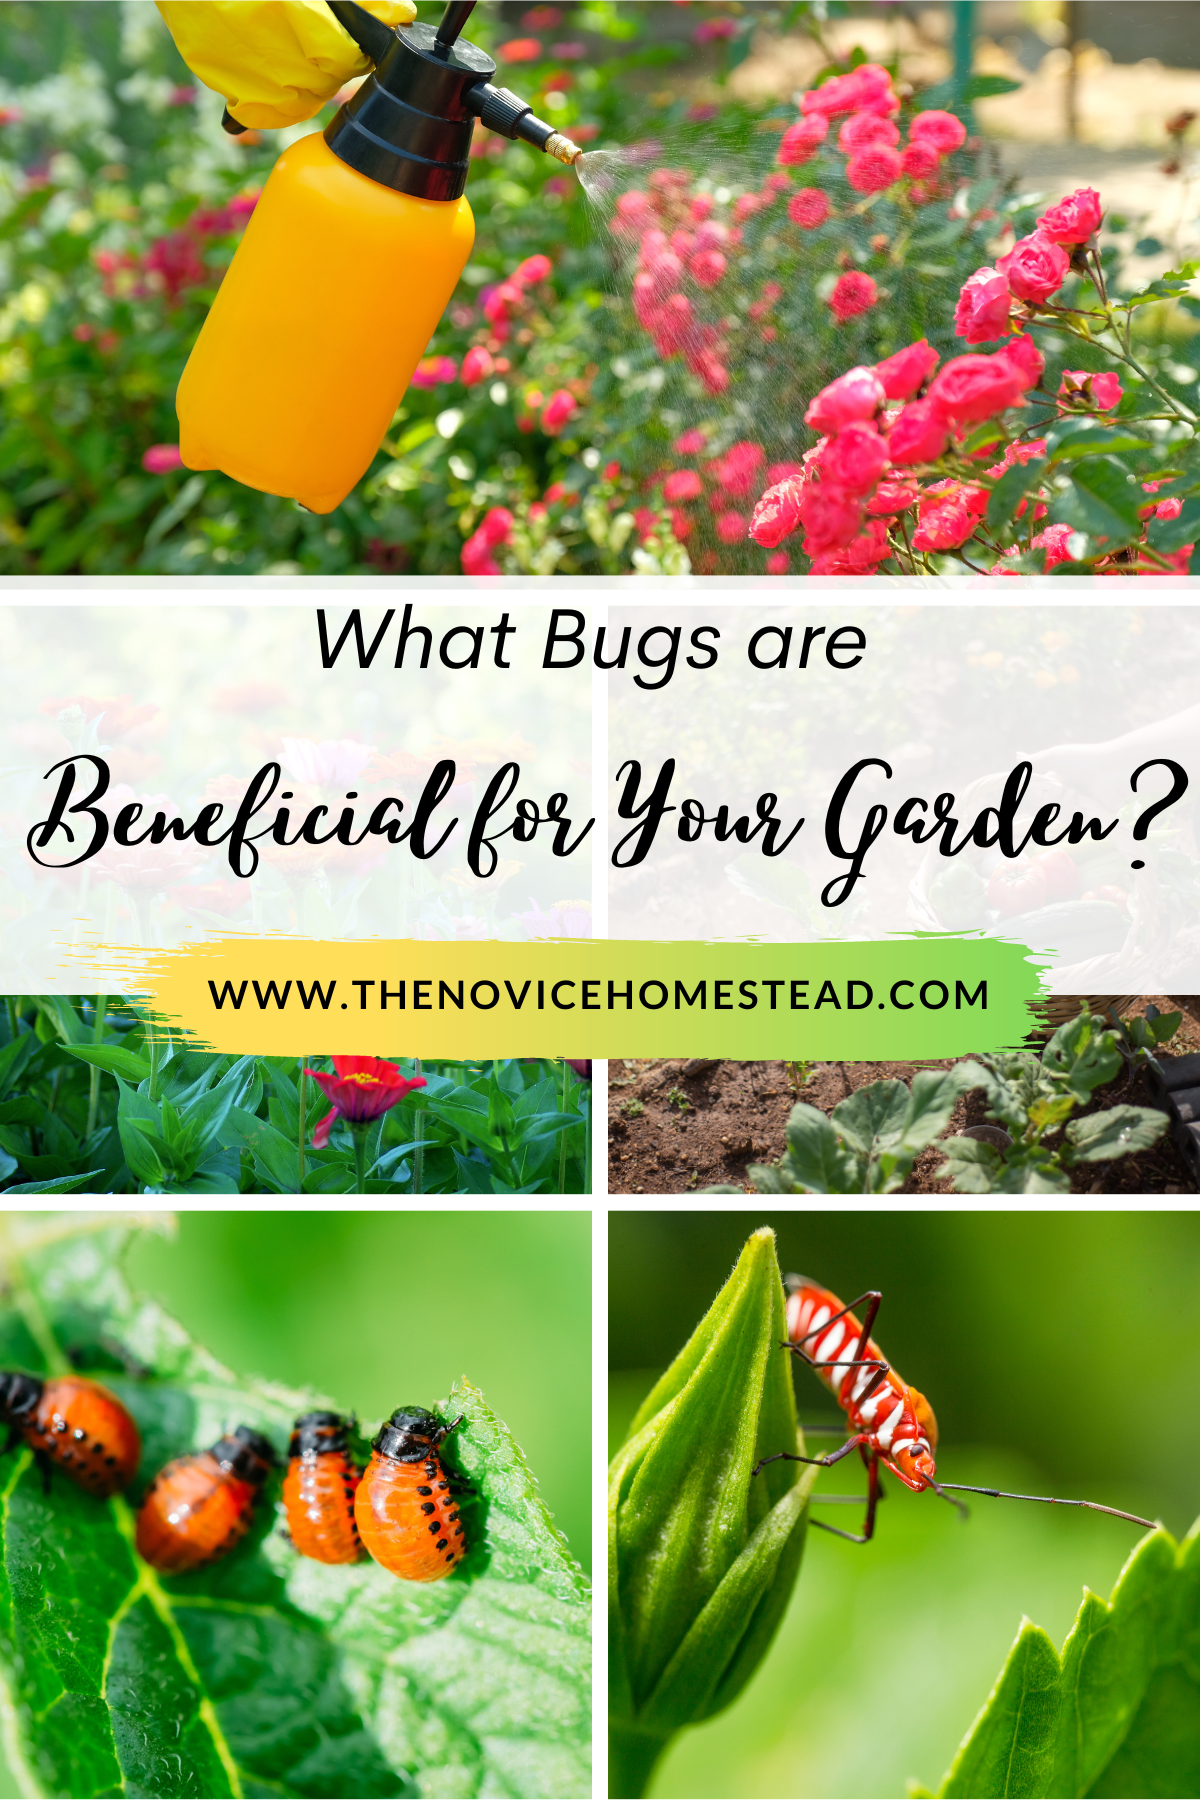 collage image of bugs on plants; text overlay "What Bugs Are Beneficial For Your Garden?"